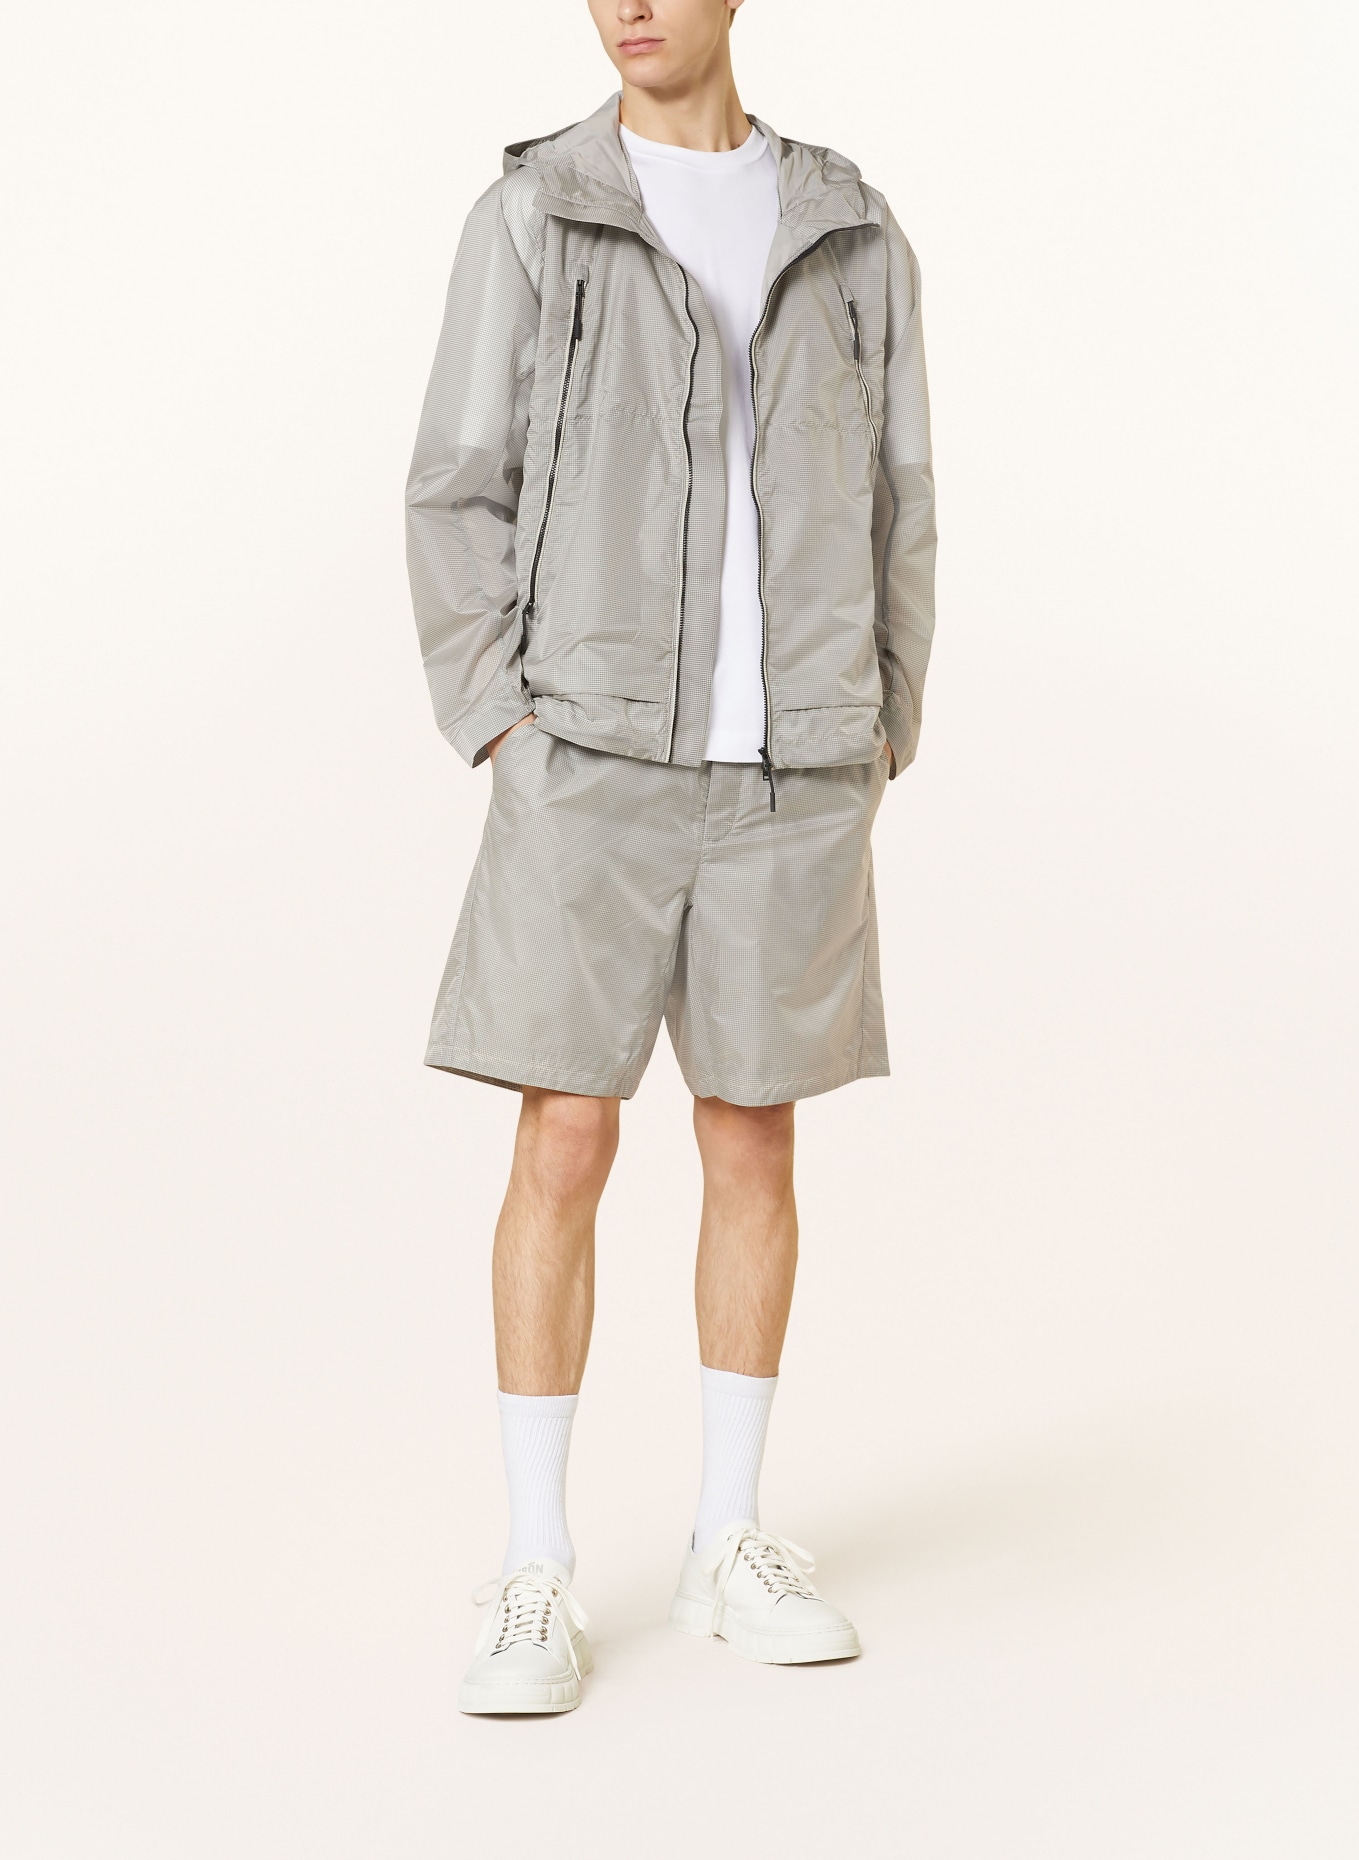 NORSE PROJECTS Shorts PASMO, Color: LIGHT GRAY/ BLUE GRAY (Image 2)